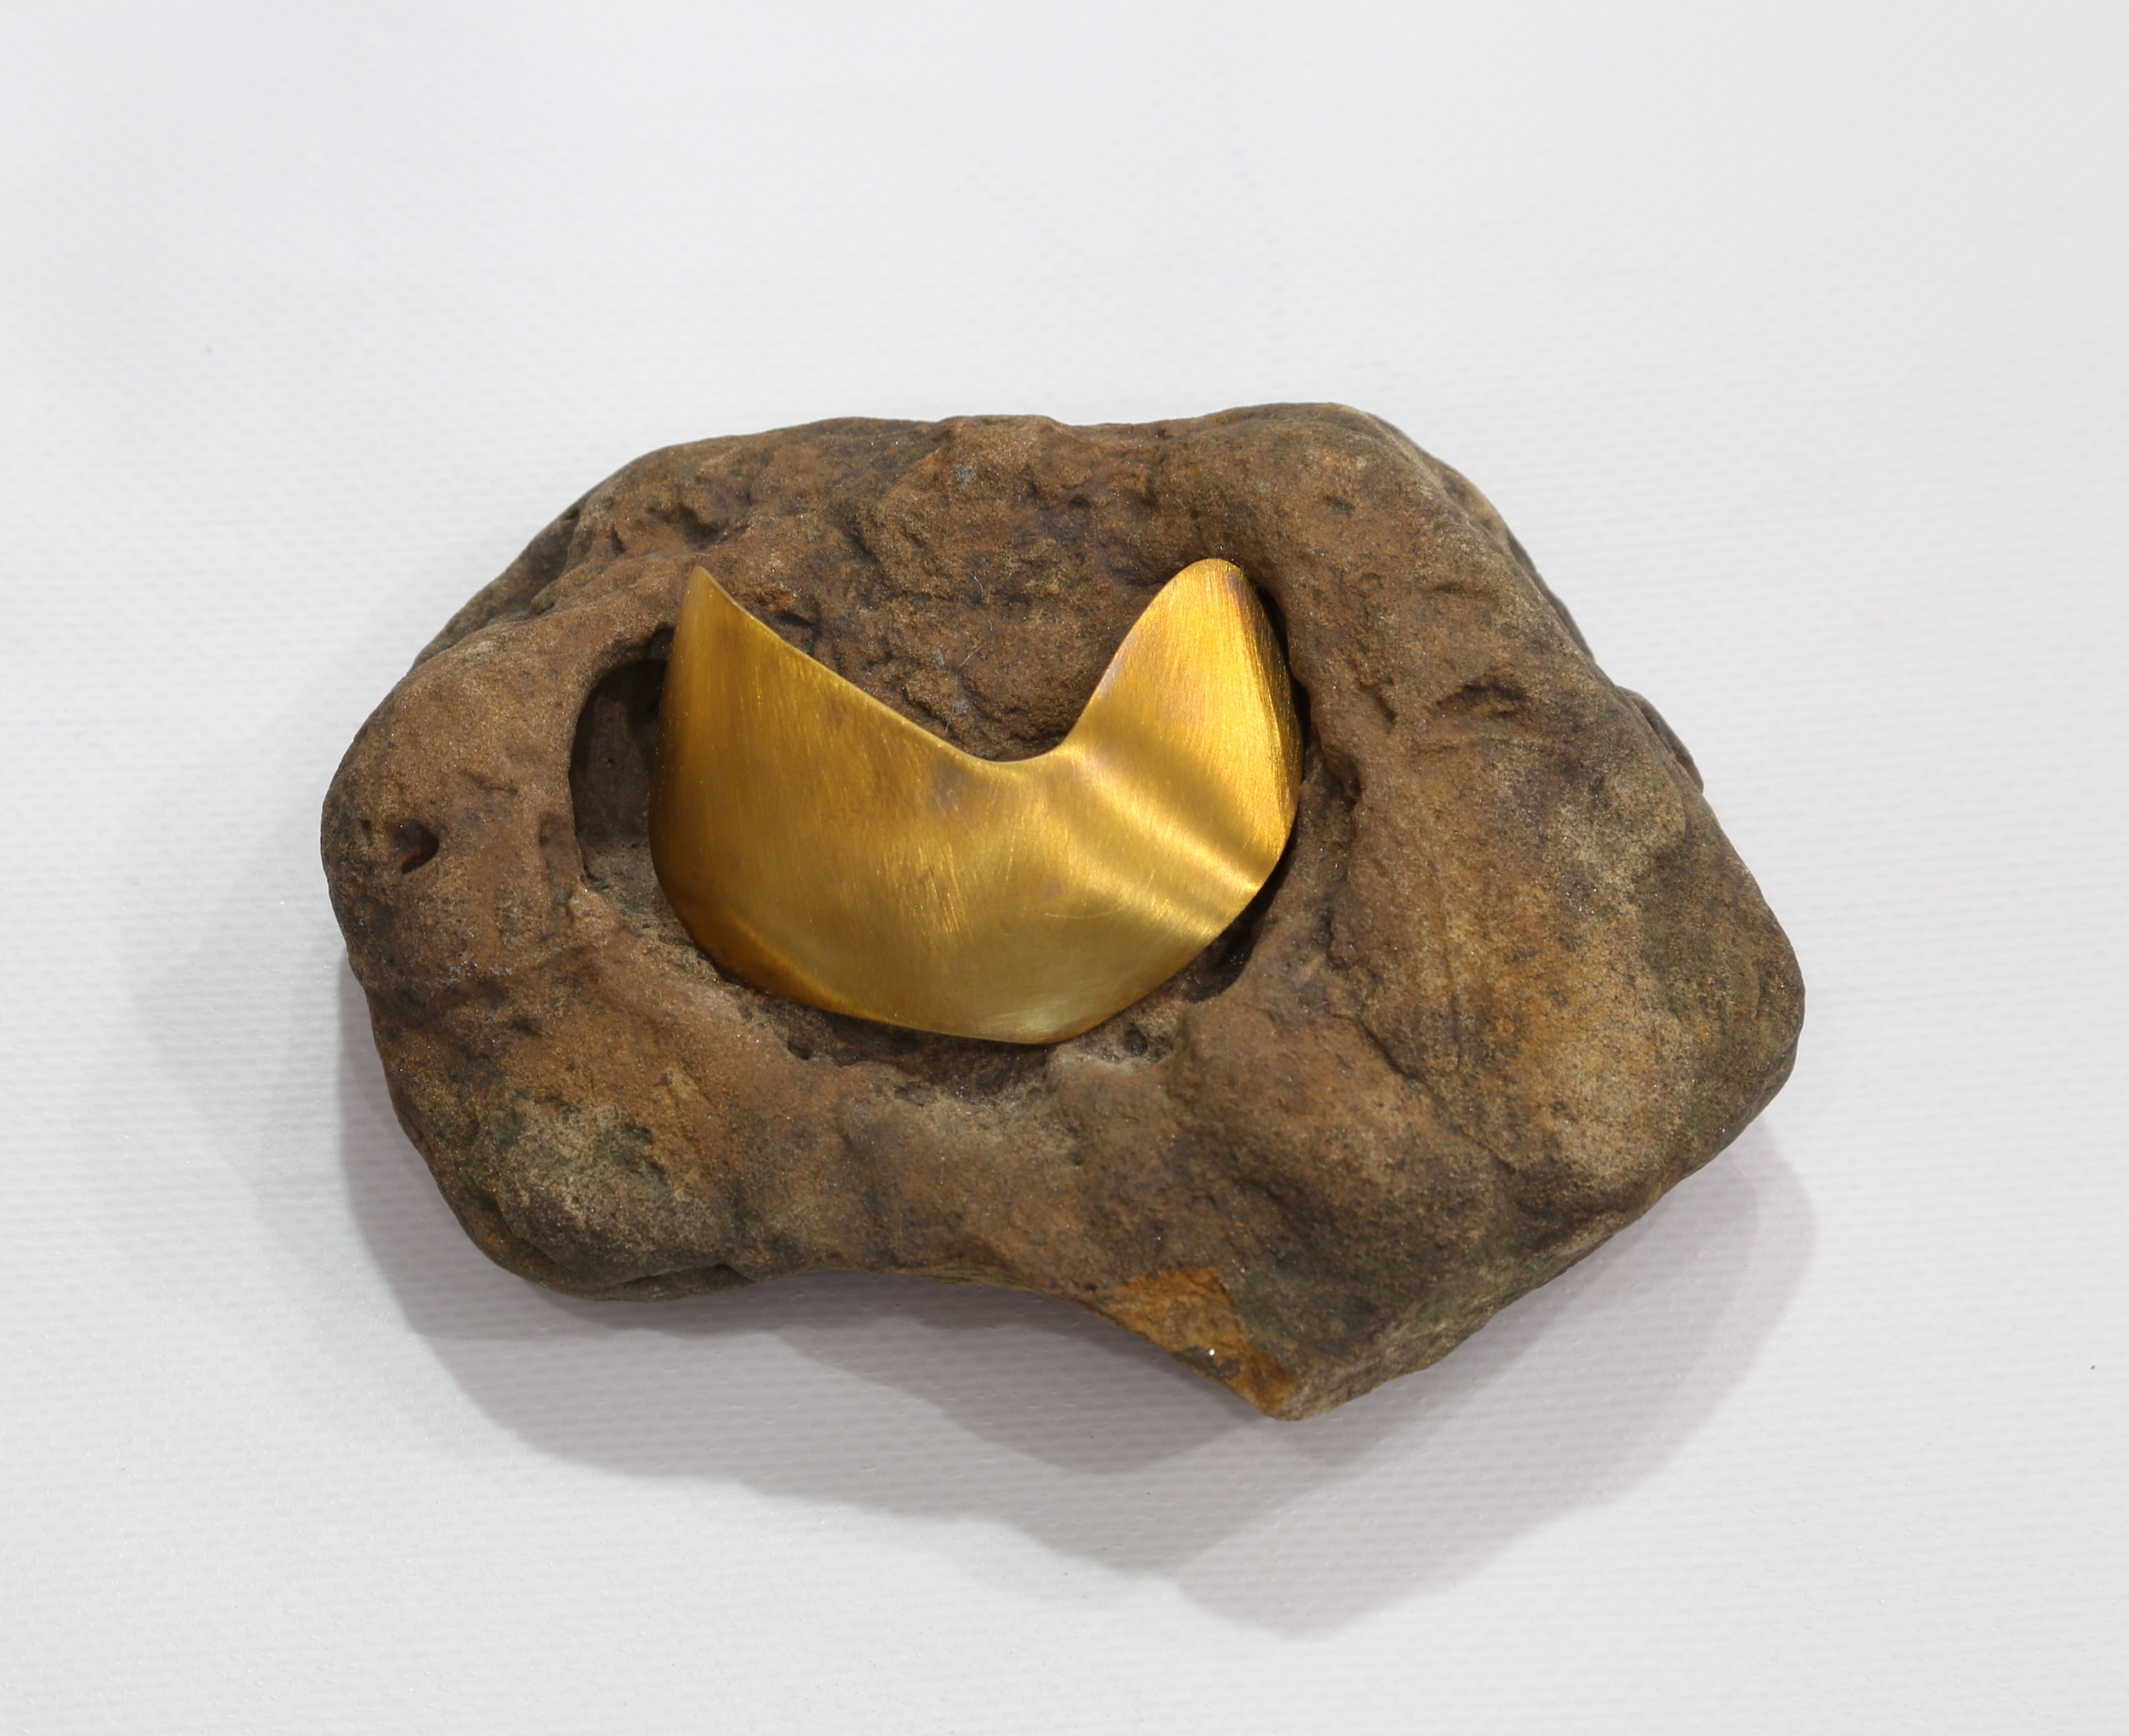 09. Traces of Life 2. 5 L x 4 W x 1.5 . brass and sandstone. 2022.�1500